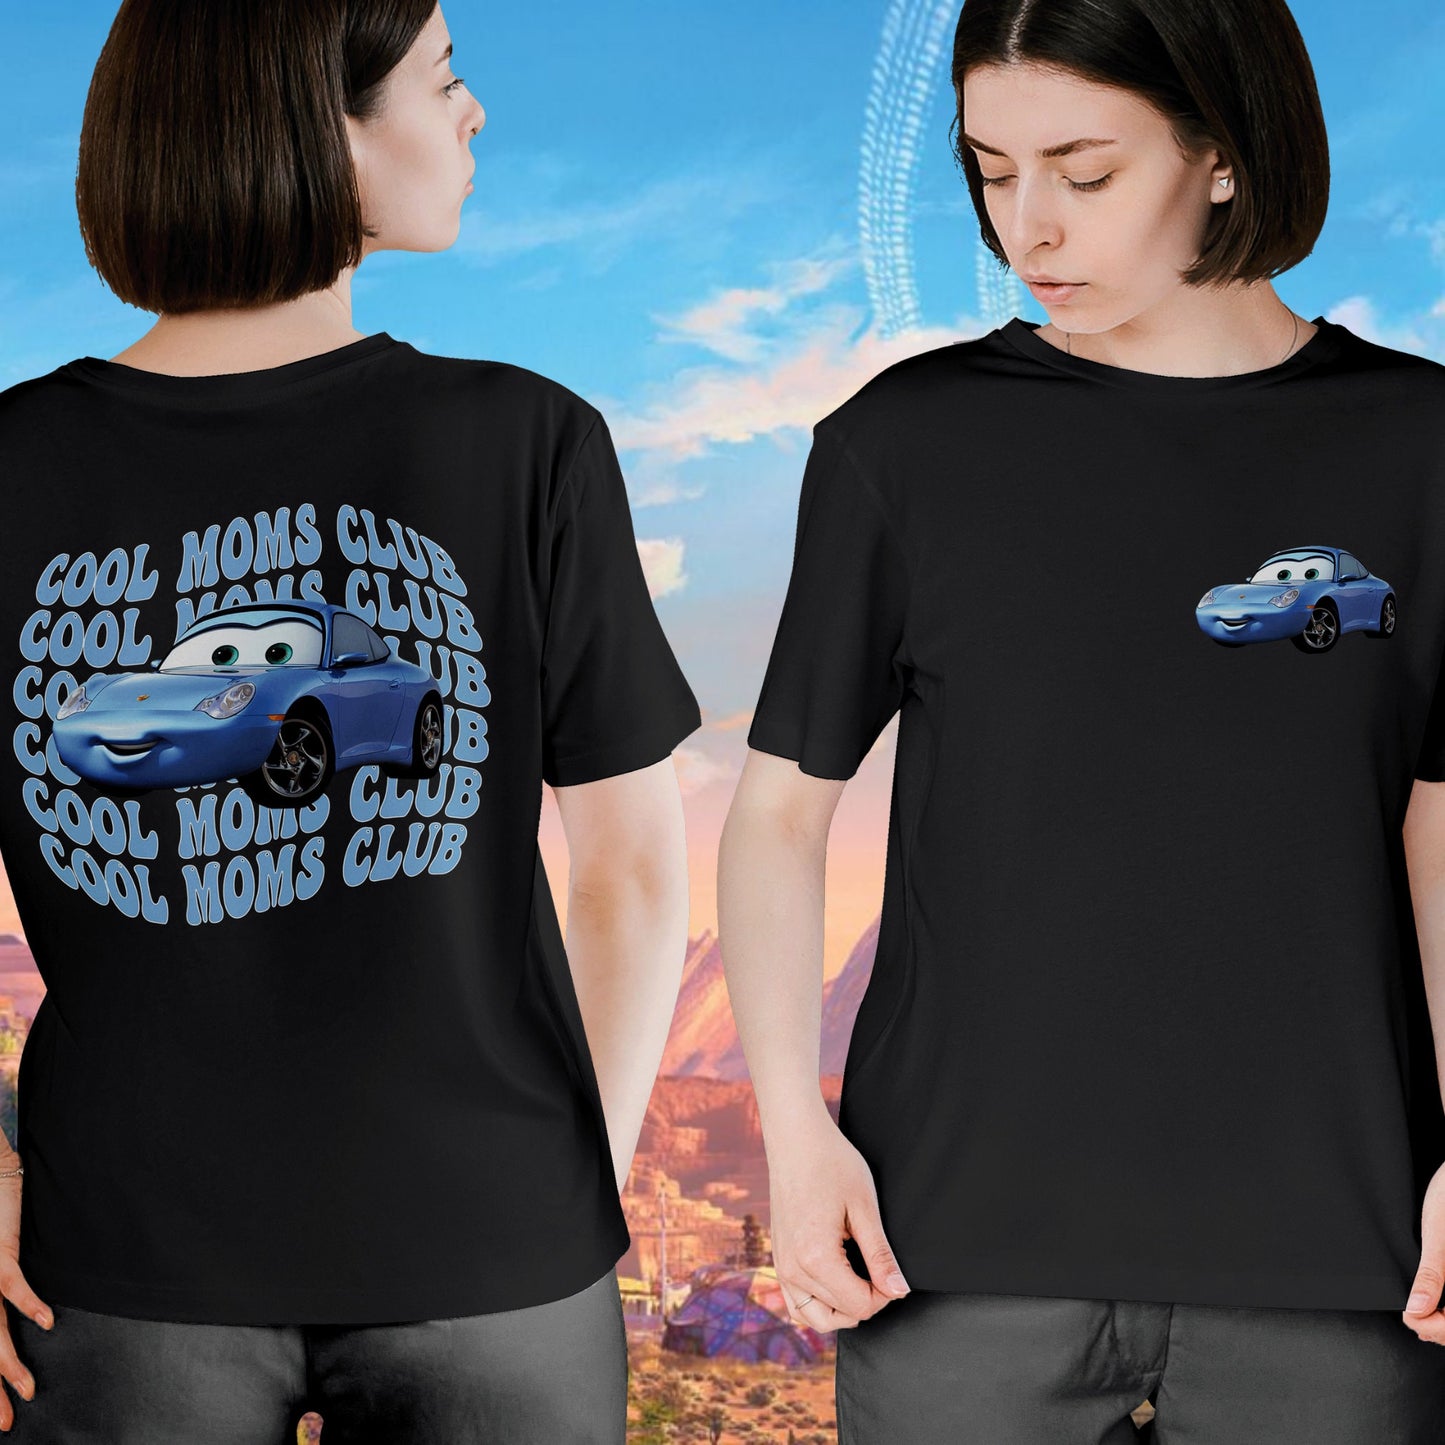 Cars Matching Shirt - McQueen and Sally Dads Moms Couple T-shirt | Kachow L. Mcqueen Design for  Fans